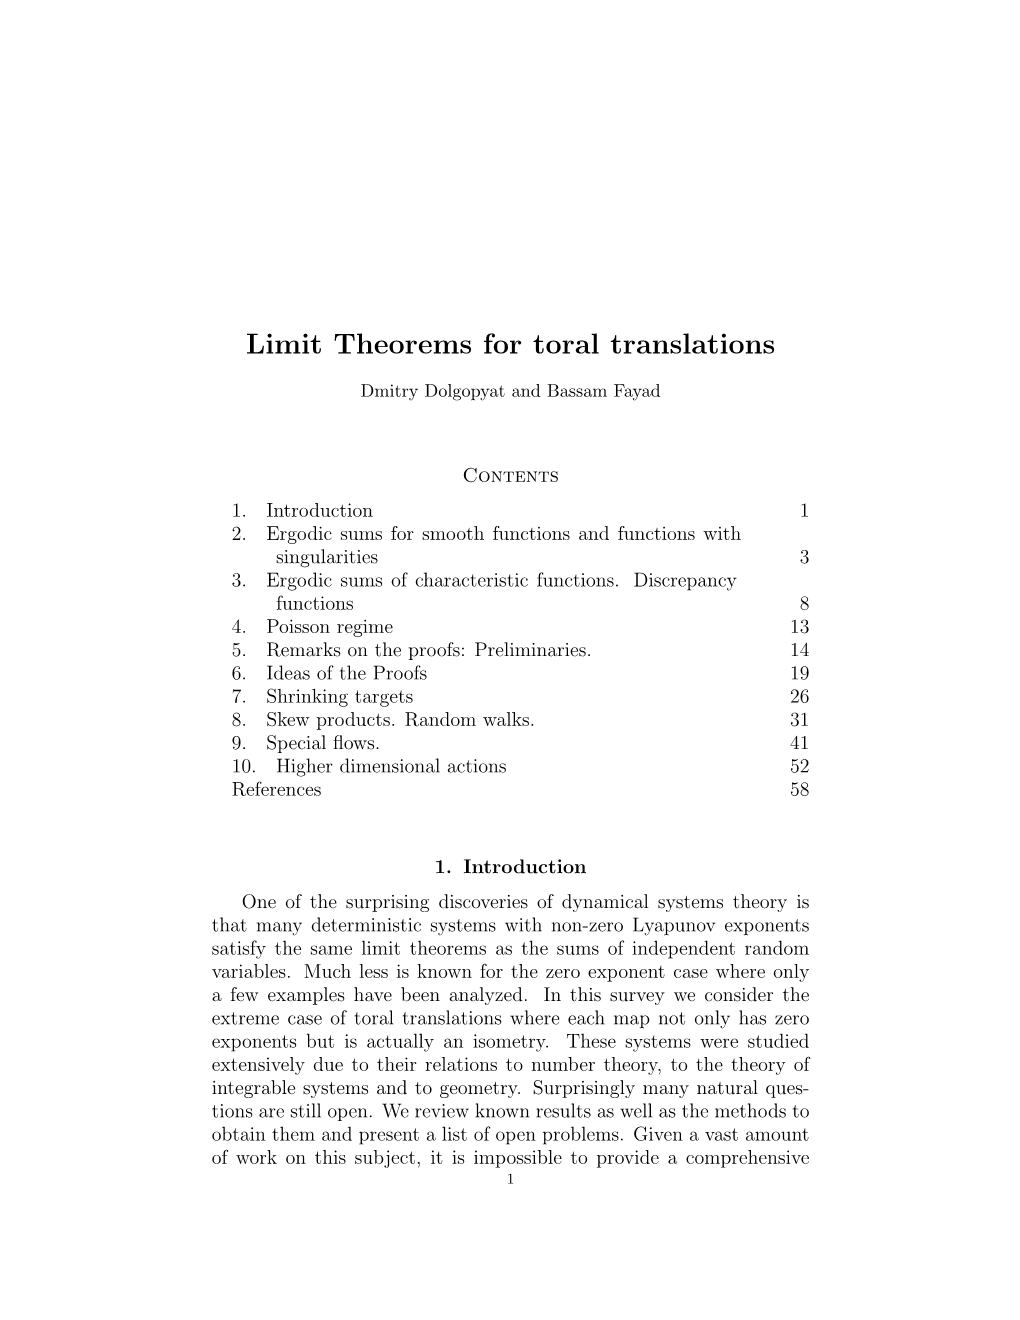 Limit Theorems for Toral Translations